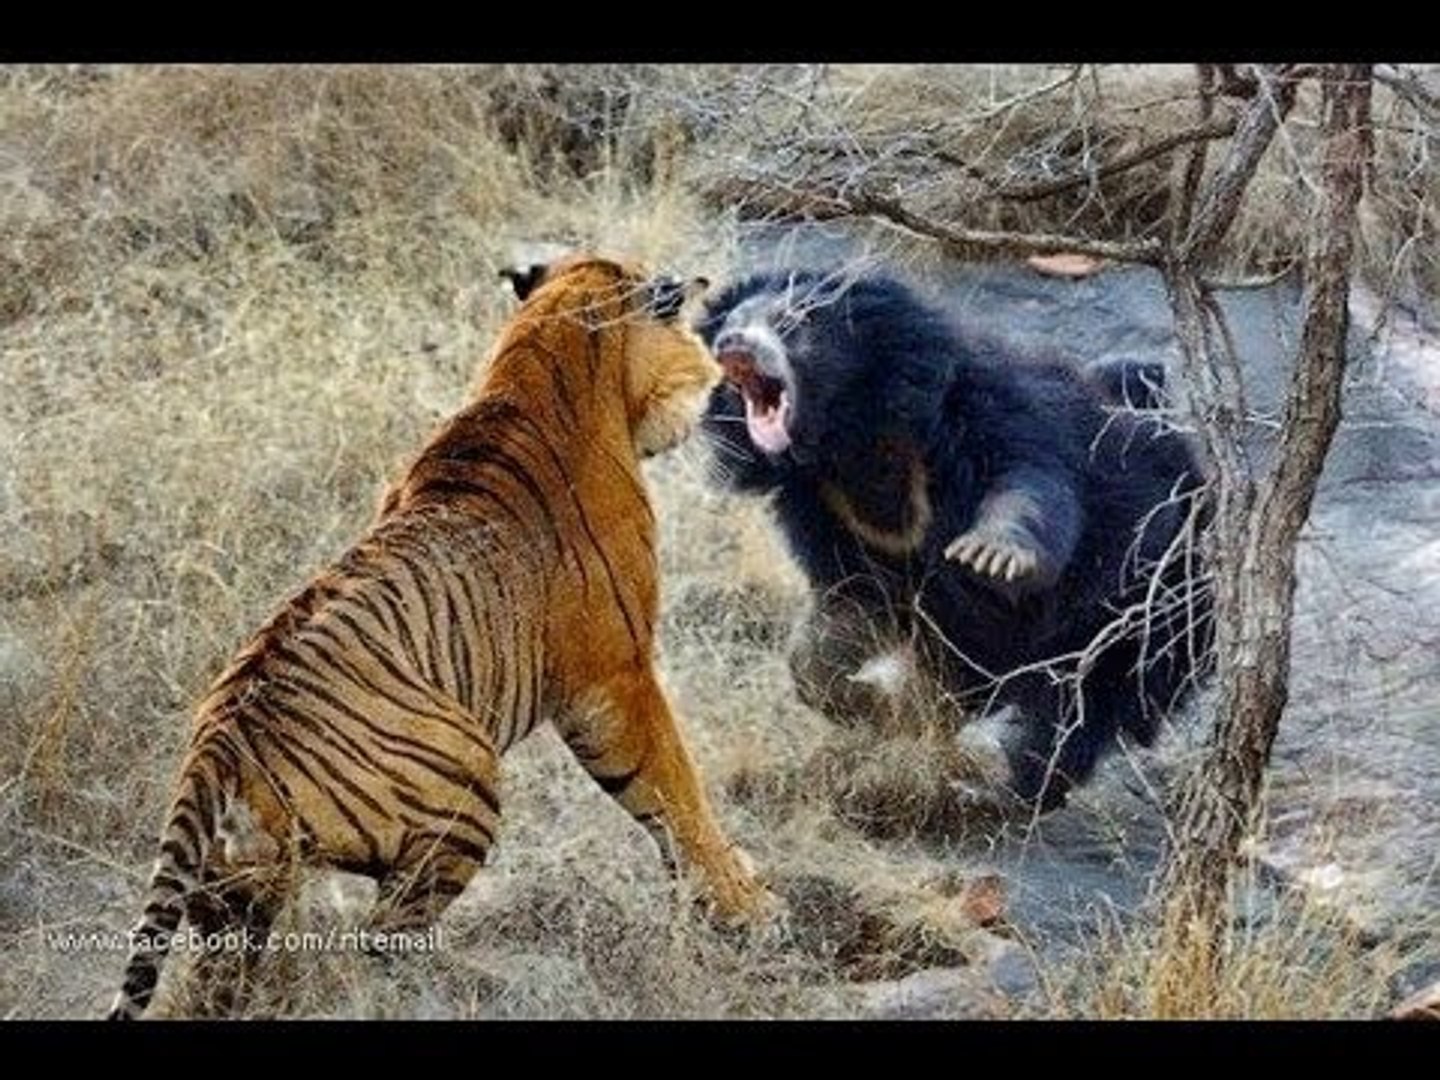 Biggest wild animal fights !! - Dailymotion Video